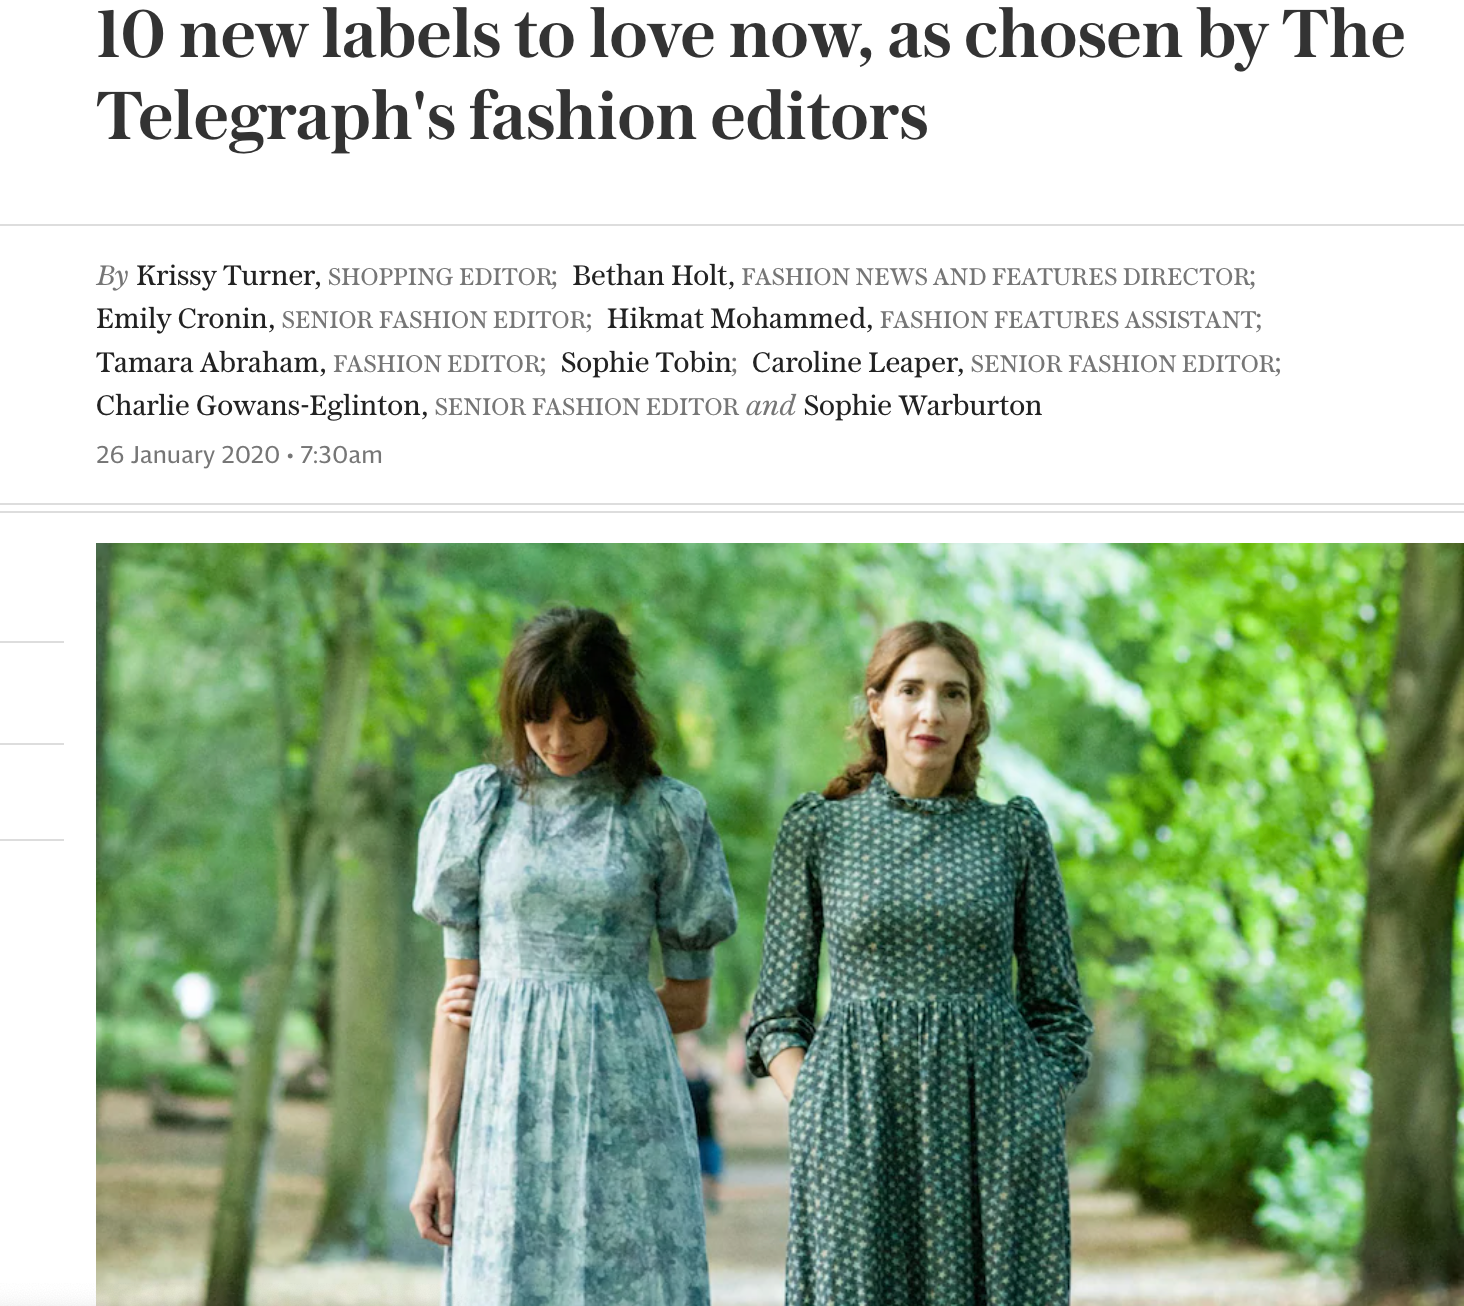 10 new labels to love now, as chosen by The Telegraph